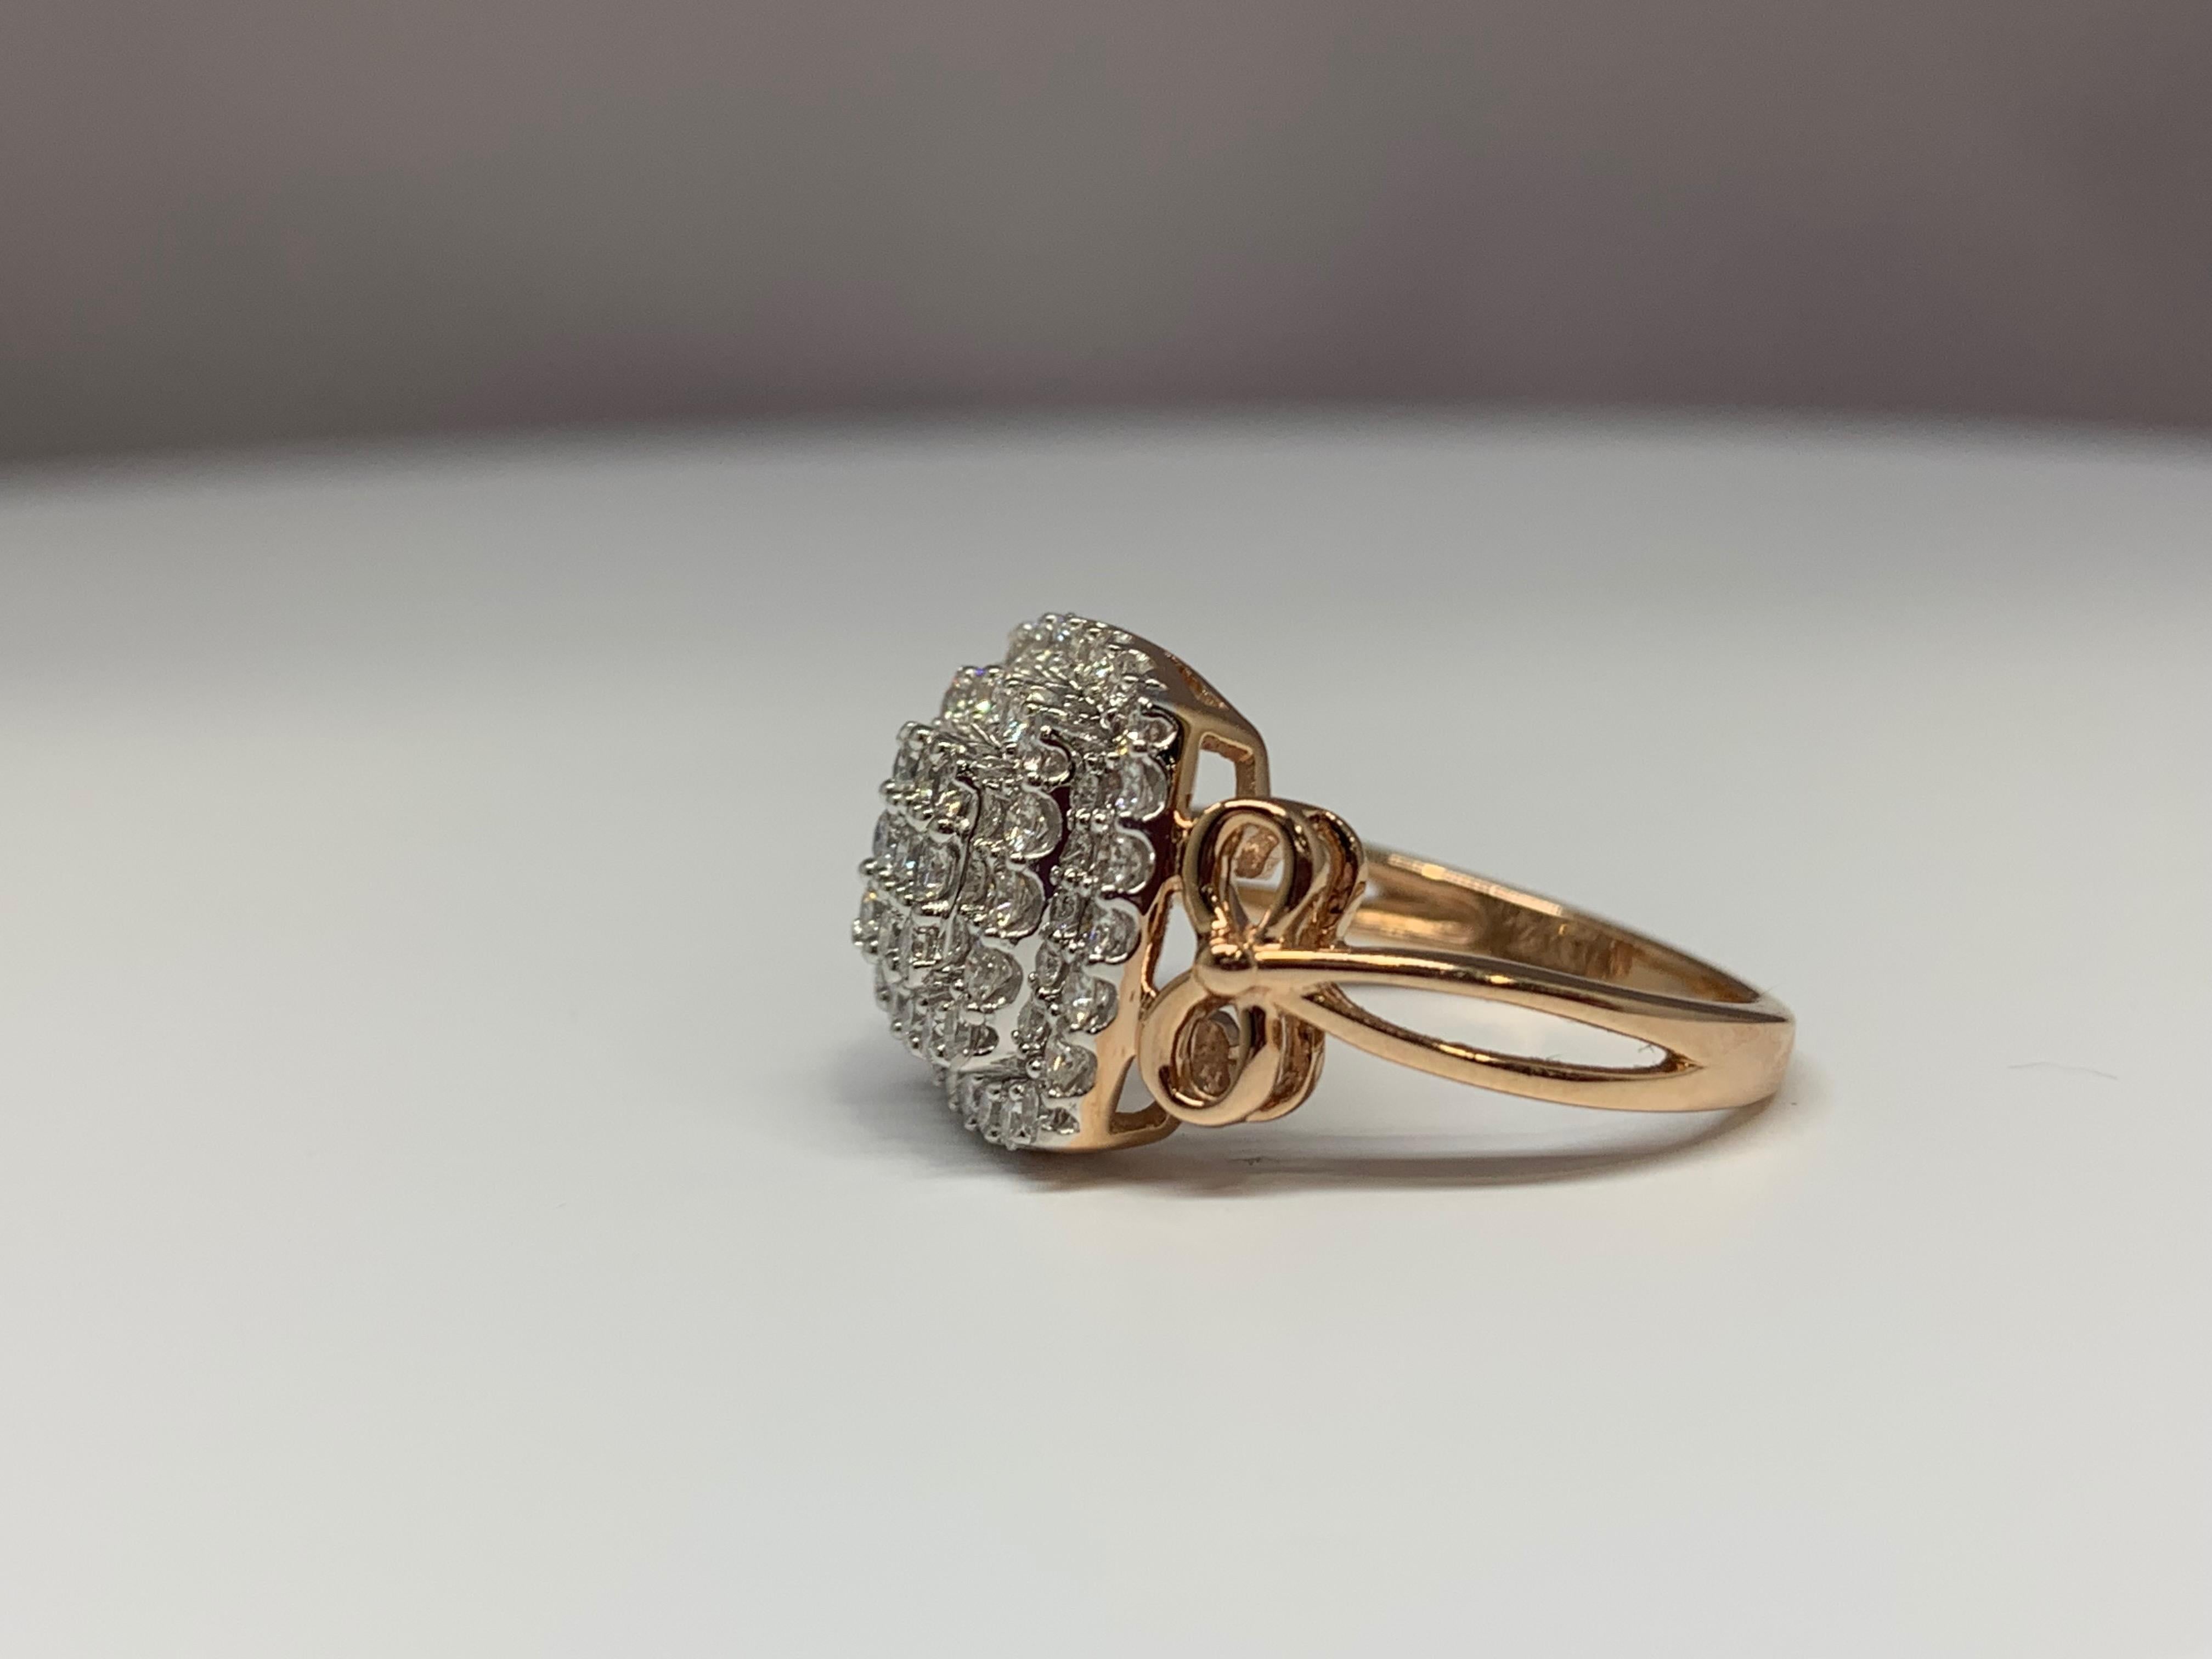 This beautiful 14K rose gold diamond cluster cocktail ring holds a 1.00 carat total weight of round white diamonds. The ring features a double-halo design with prong-set diamonds and a split-shank detail. The ring is currently a size 7 but can be